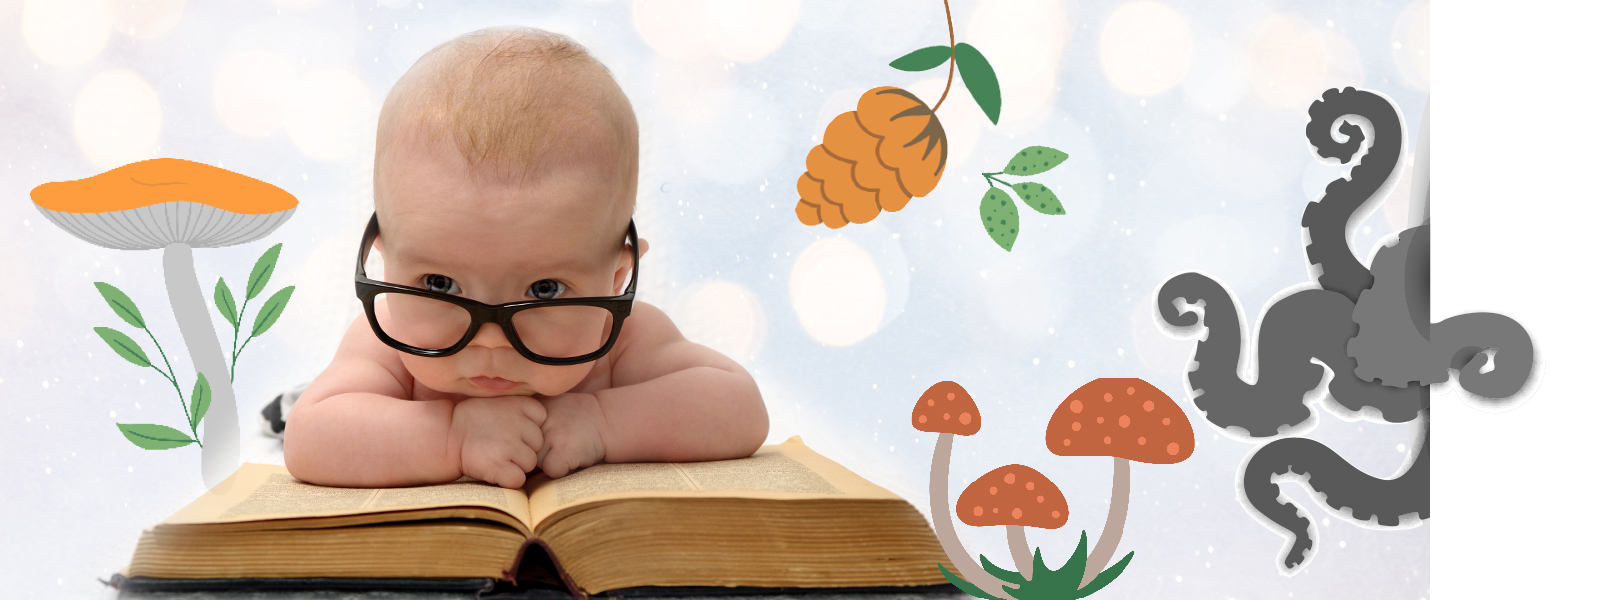 baby wearing glasses propped up on arms on an open book, surrounded by illustrations of plants and an octopus